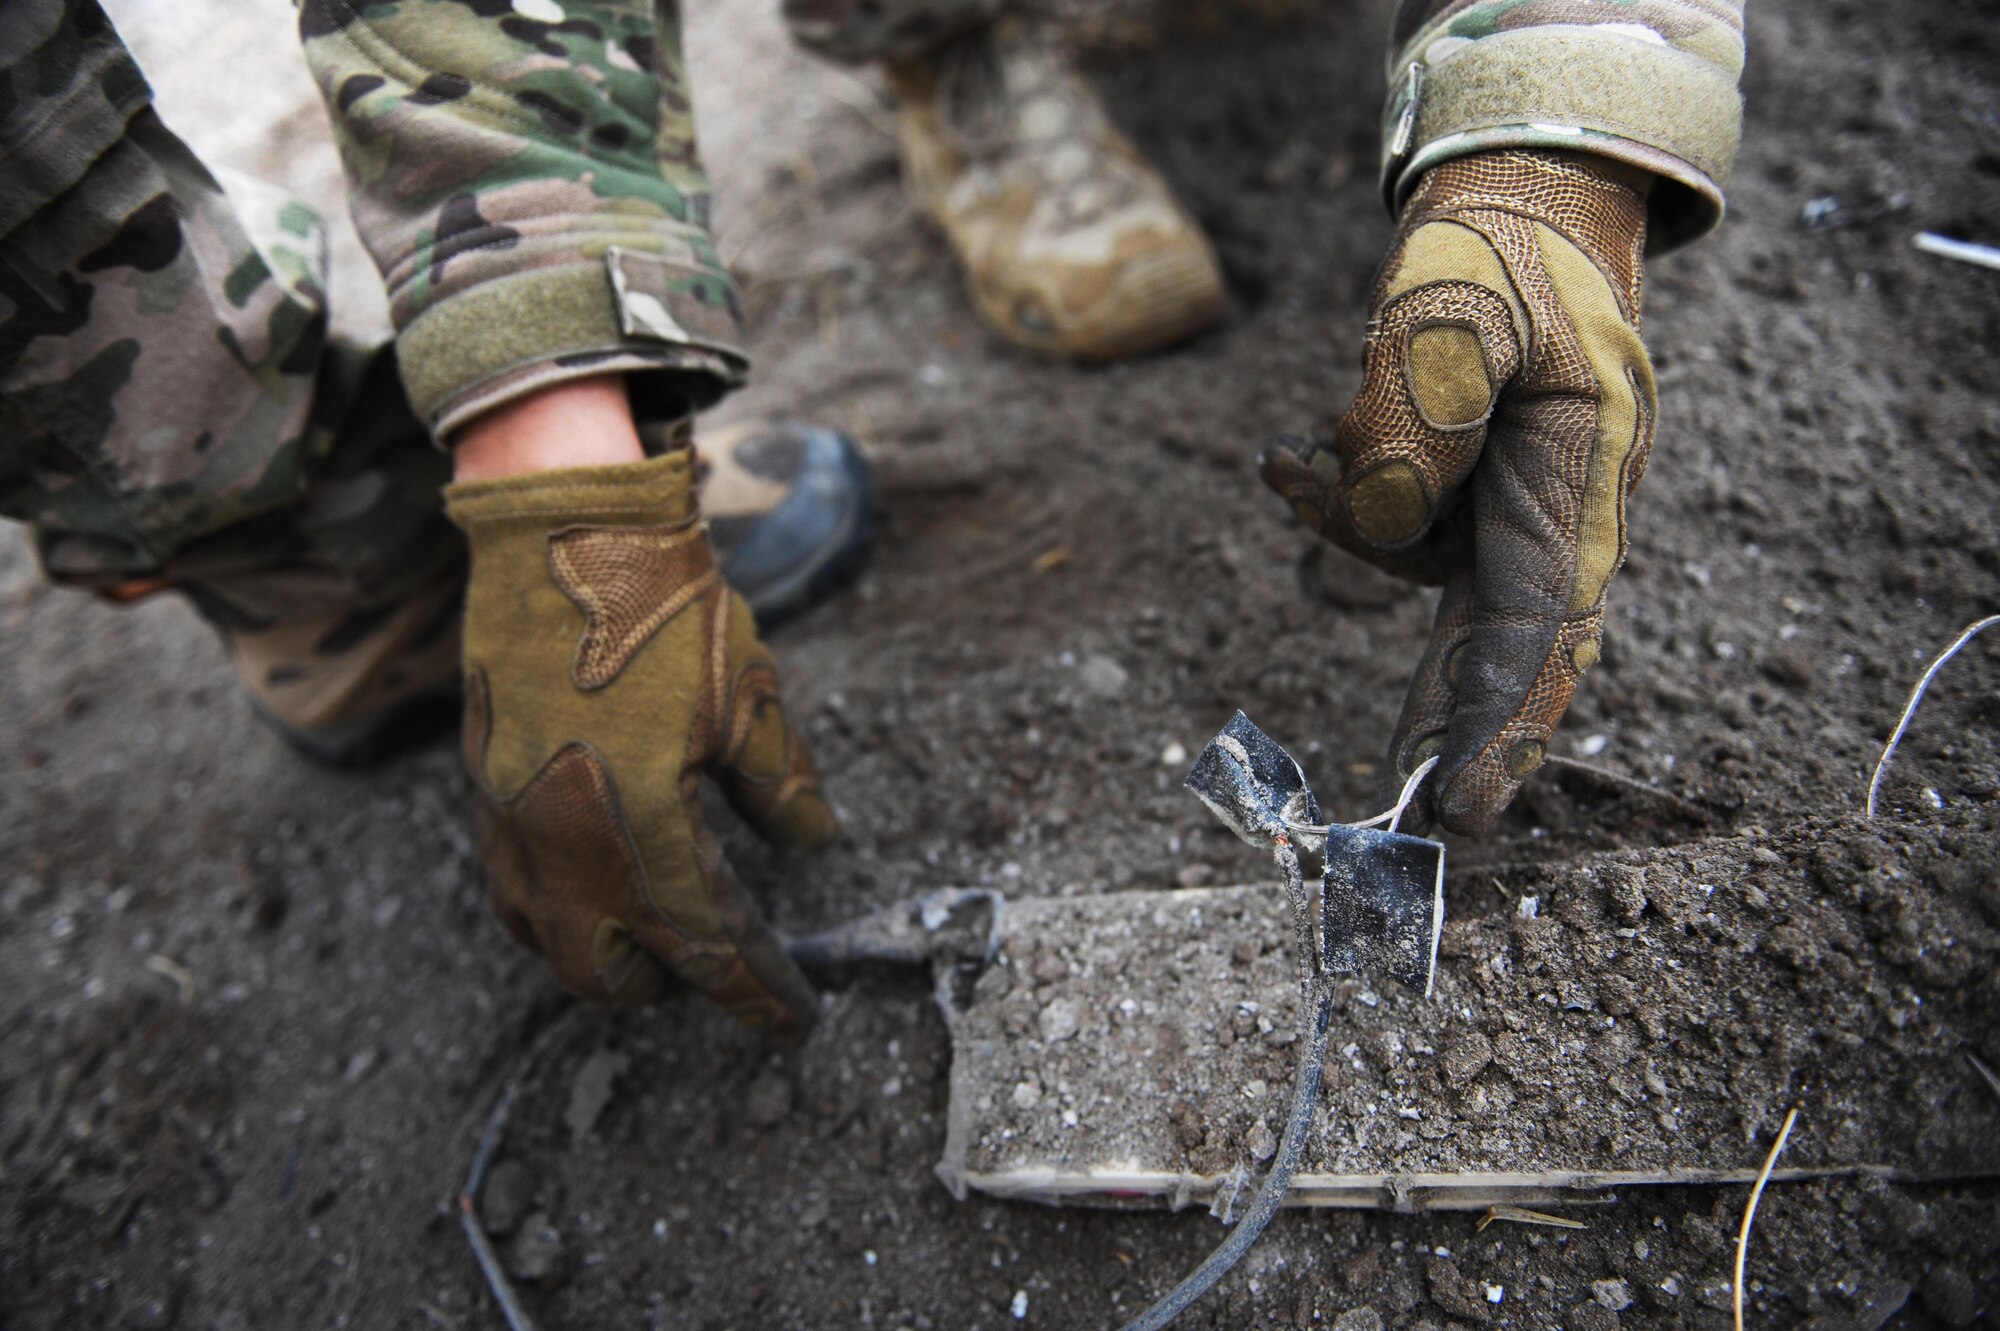 An Airman with the 775th Explosive Ordnance Disposal Flight examines wiring on a pressure plate used in an improvised explosive device during a training event at Hill Air Force Base, Utah, the training took place from Nov. 2-6, 2015.  Being an EOD technician requires Airmen to be adept in math, chemistry, forensics, mechanics, advanced electrical circuits and have the ability to put the knowledge to use under extreme pressure. (U.S. Air Force photo/Micah Garbarino)